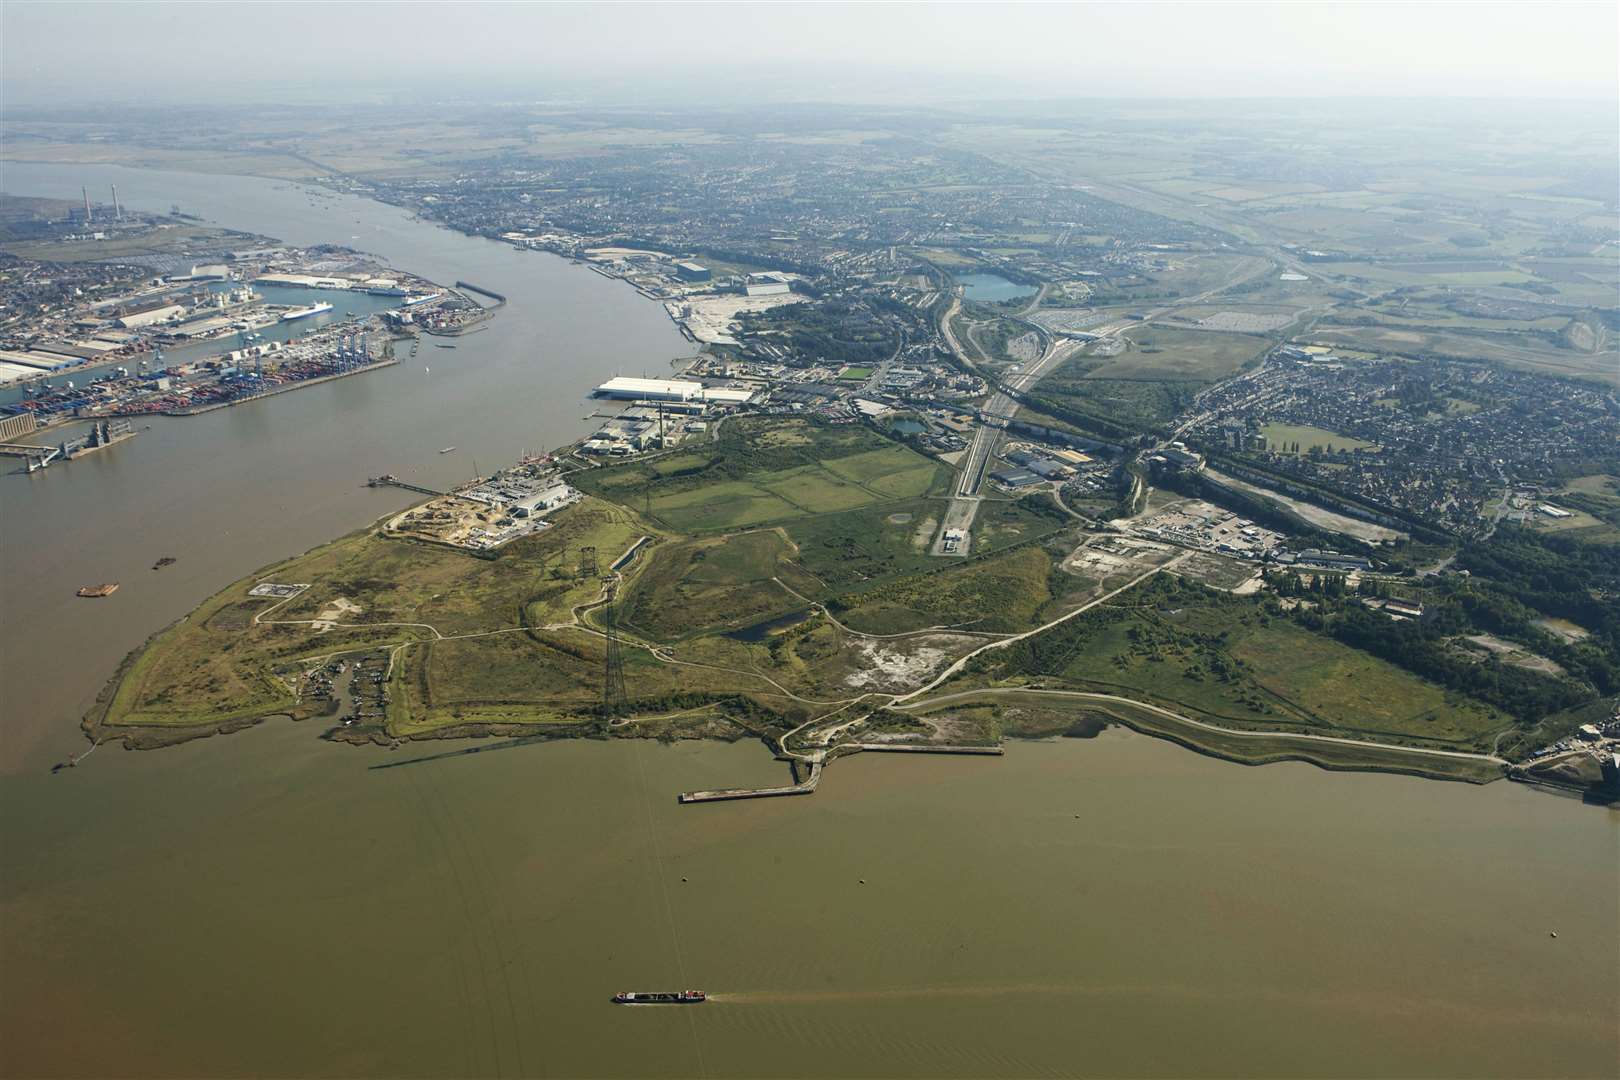 The London Resort is set to be built on the Swanscombe Peninsula, which has been designated as a Site of Special Scientific Interest (SSSI) by Natural England. Picture: EDF Energy